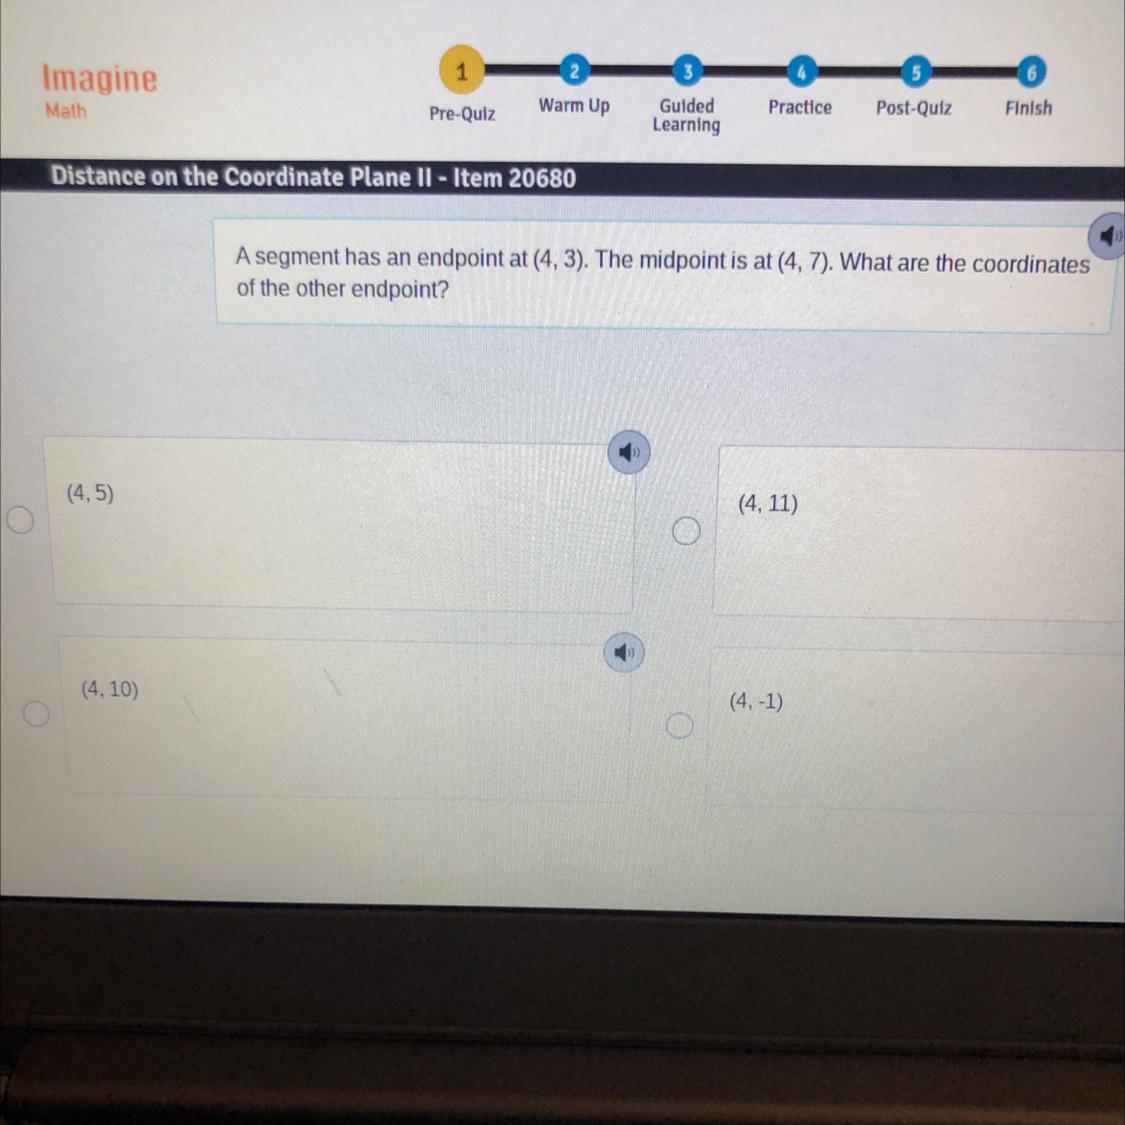 Please Help I Am Stuck With This Problem For Homework. I Am In The 6th Grade.